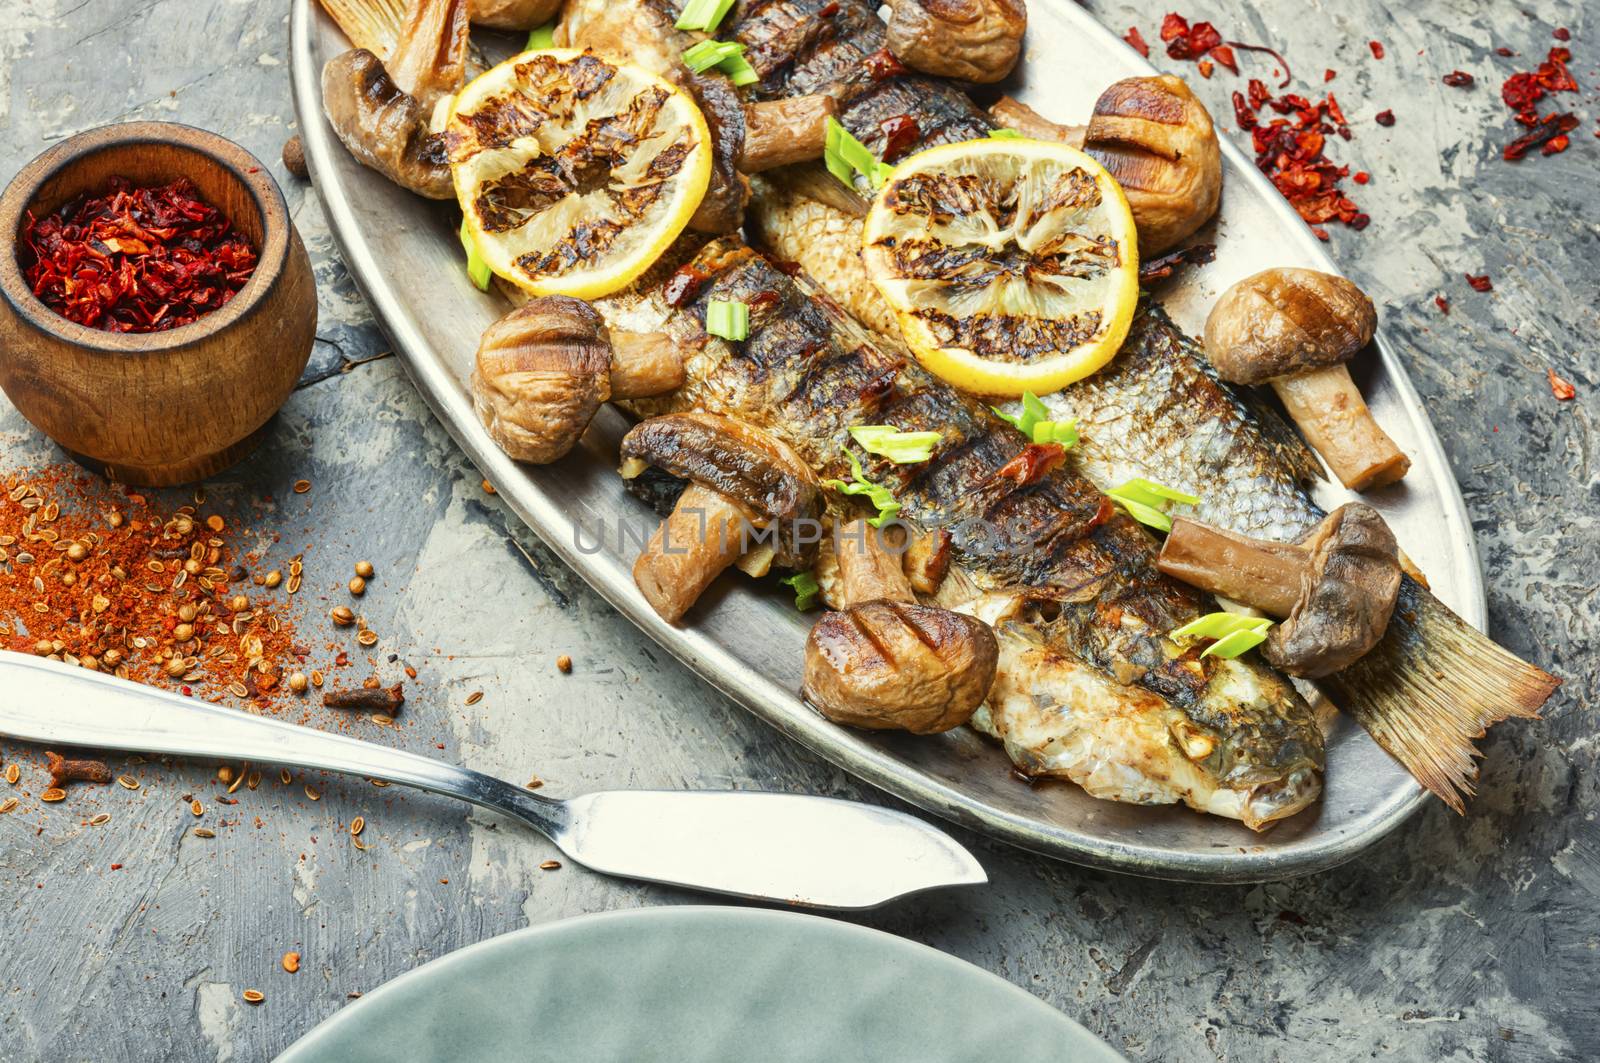 Roasted pelengas fish with mushrooms and lemon.Sea food.Grilled fish with champignon